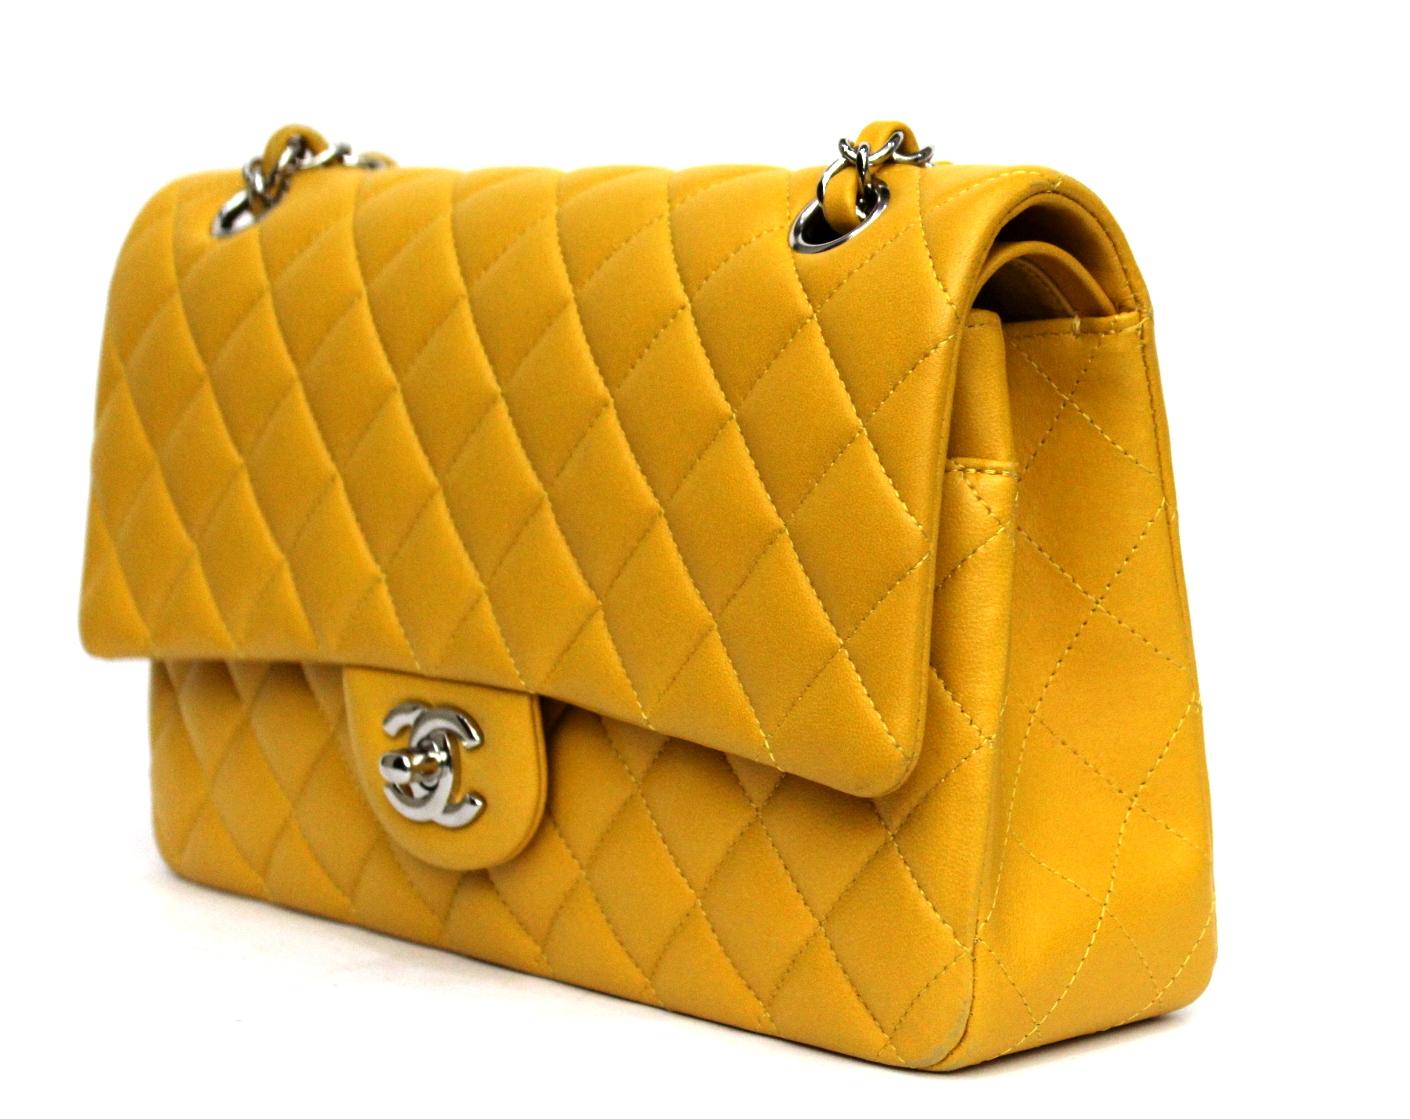 Chanel 2.55 double flap in medium size mustard color and silver hardware.